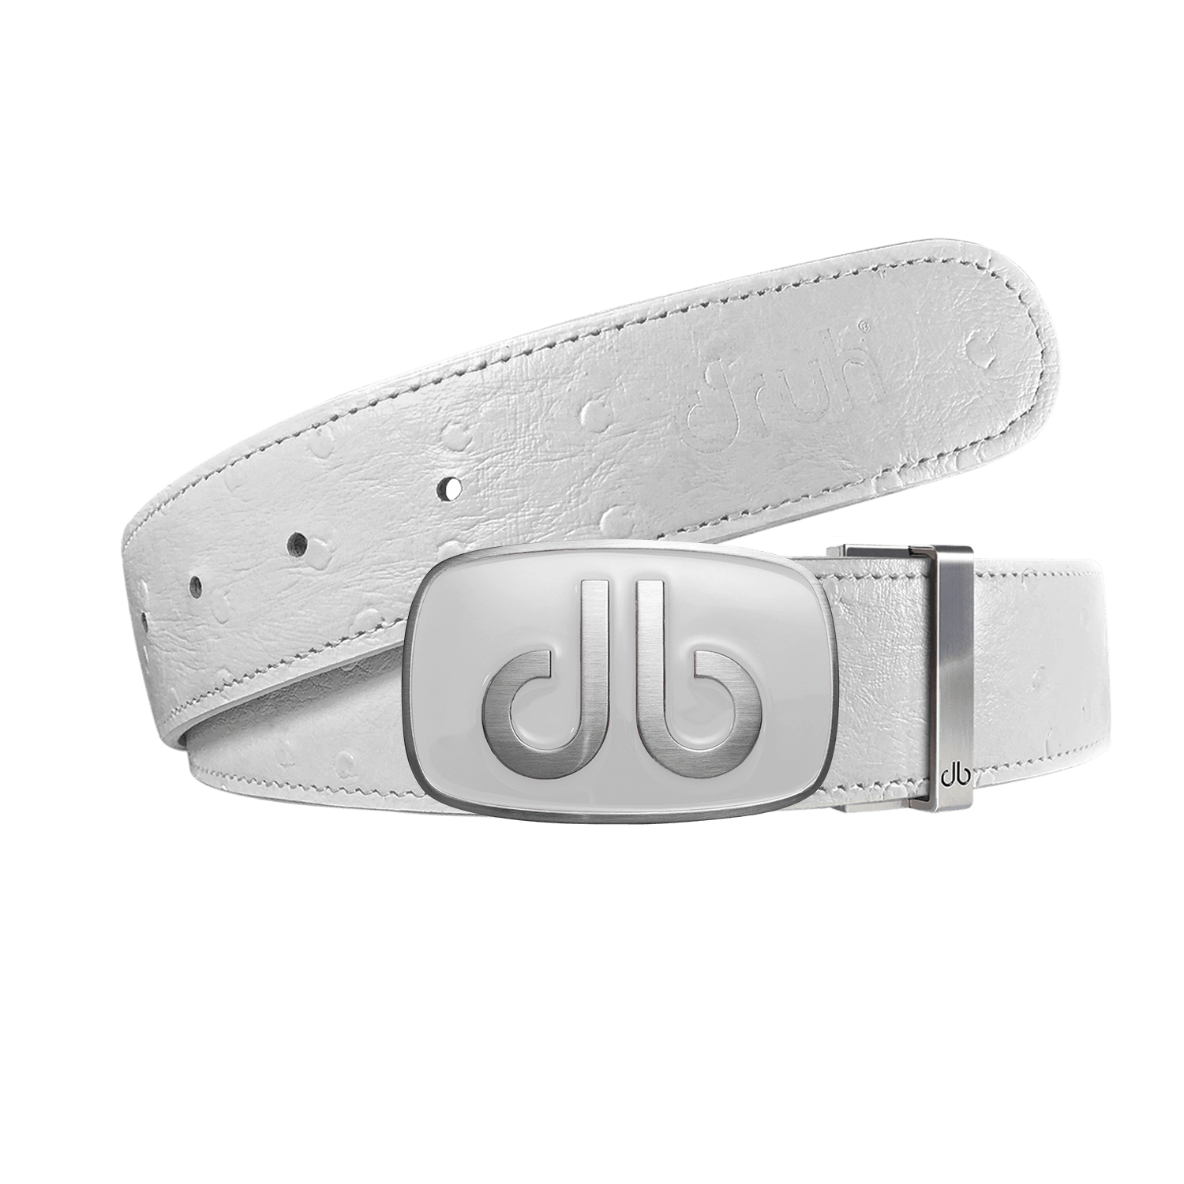 White ostrich strap with Big white buckle